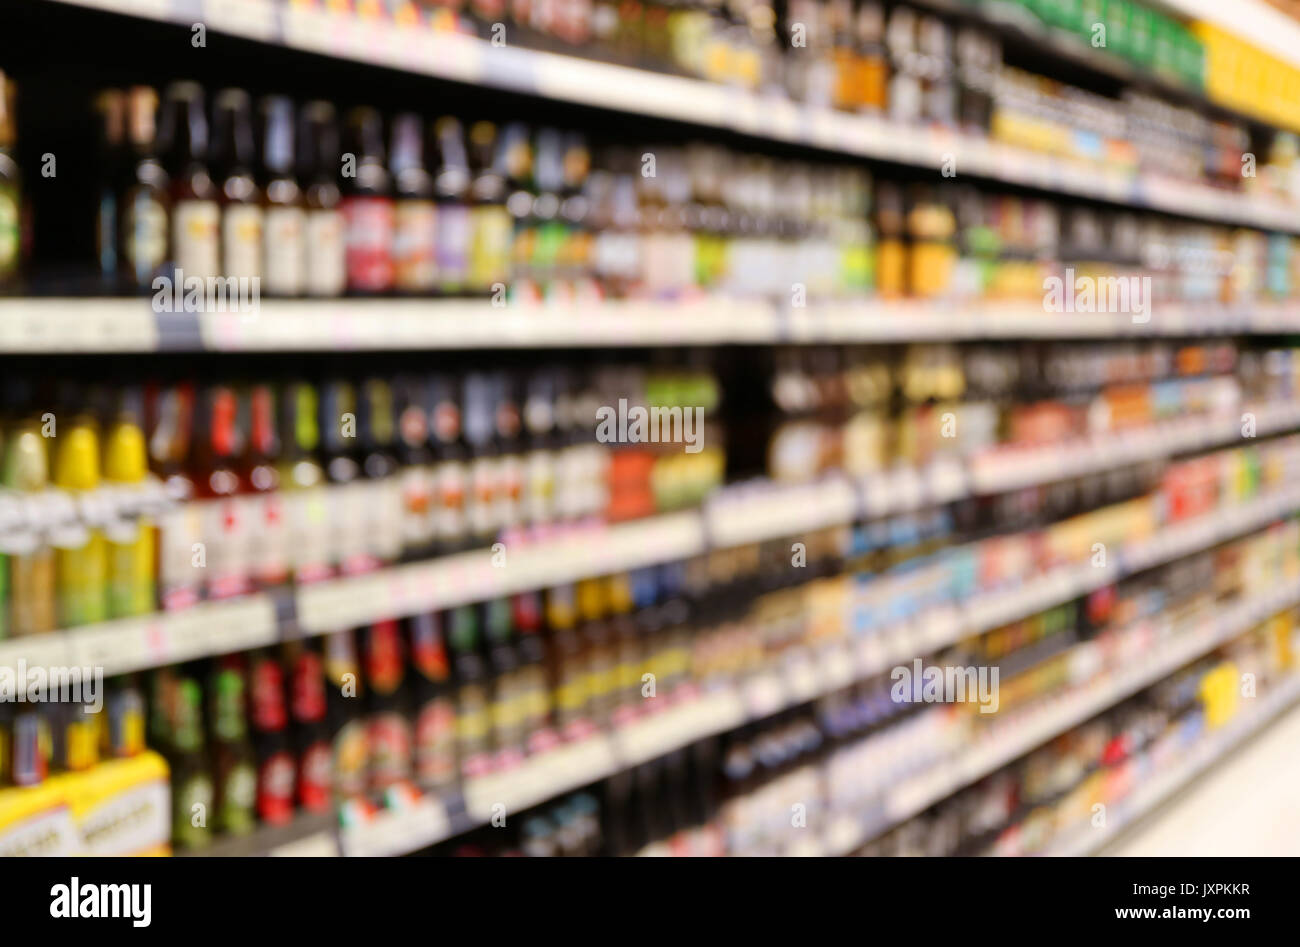 Abstract blurred grocery shelf full of consumer goods in a supermarket Stock Photo